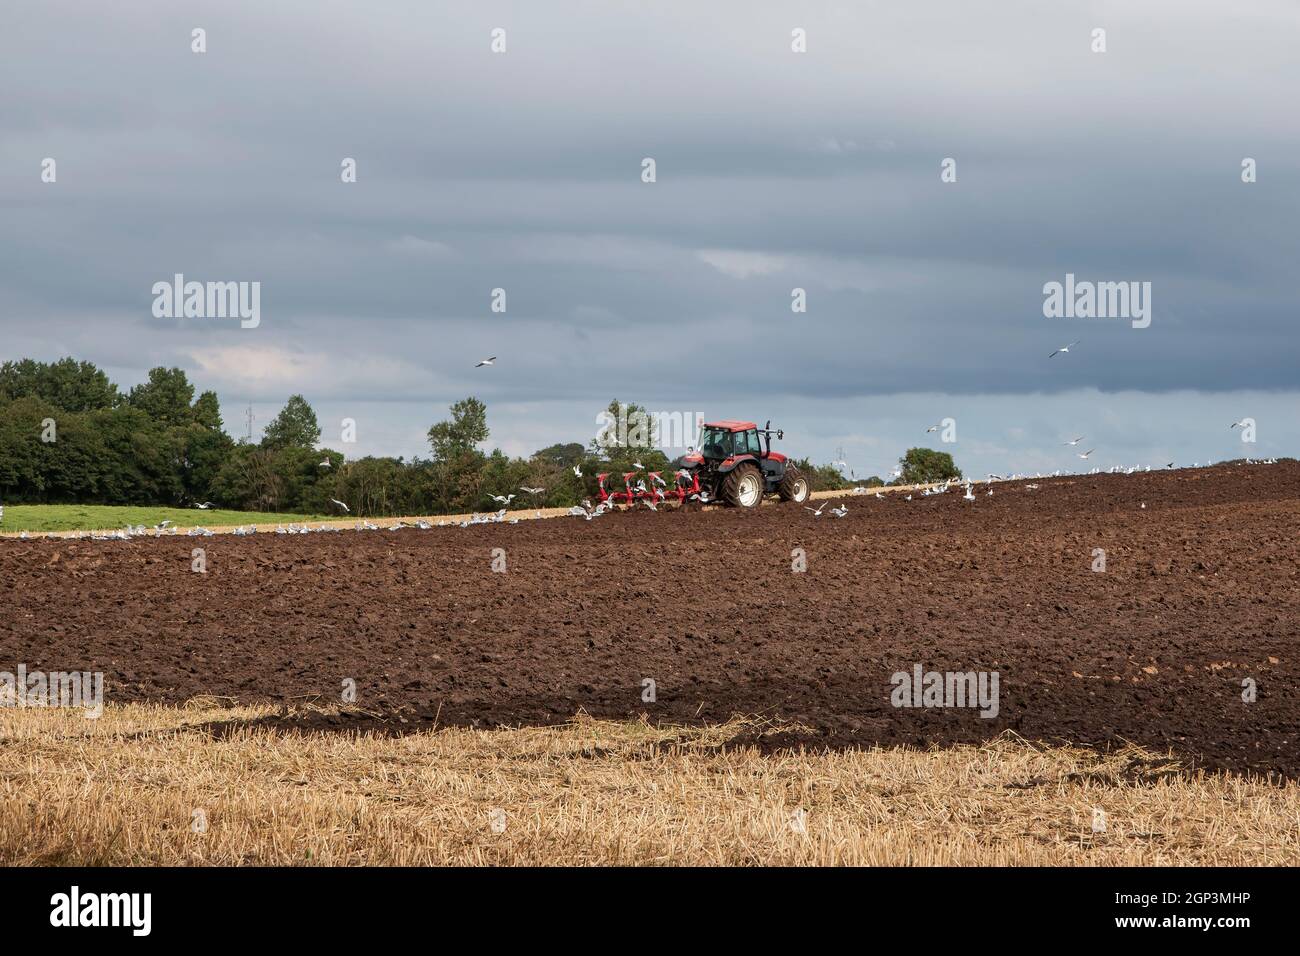 Tractor plowing a field followed by seagulls Stock Photo